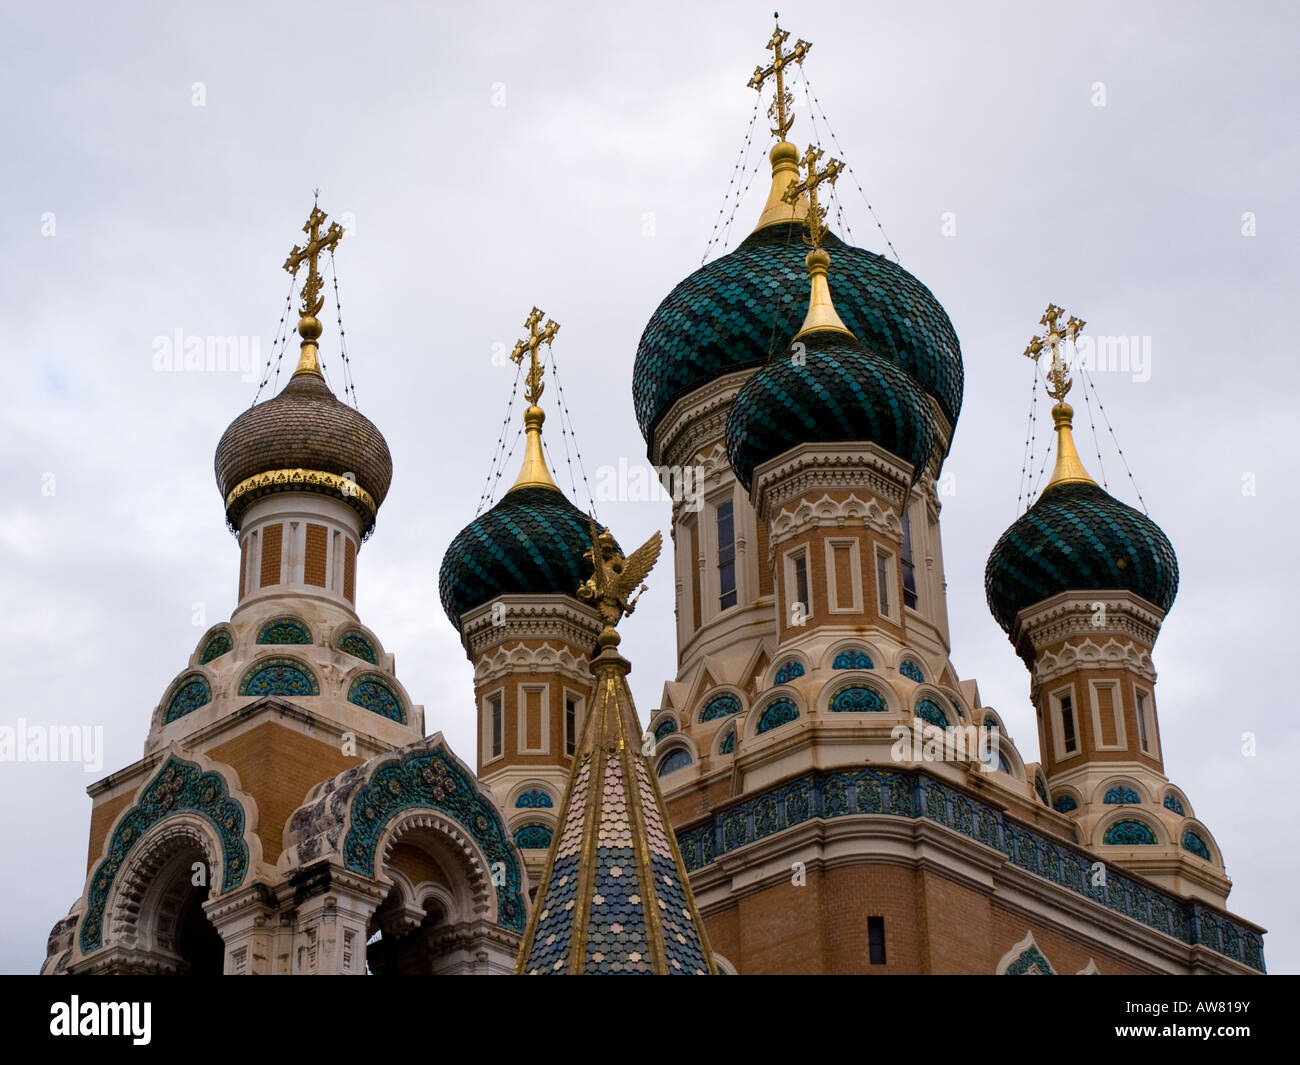 The onion-domed, colourful Cathédrale Orthodoxe Russe St-Nicolas in Nice, France. Stock Photo